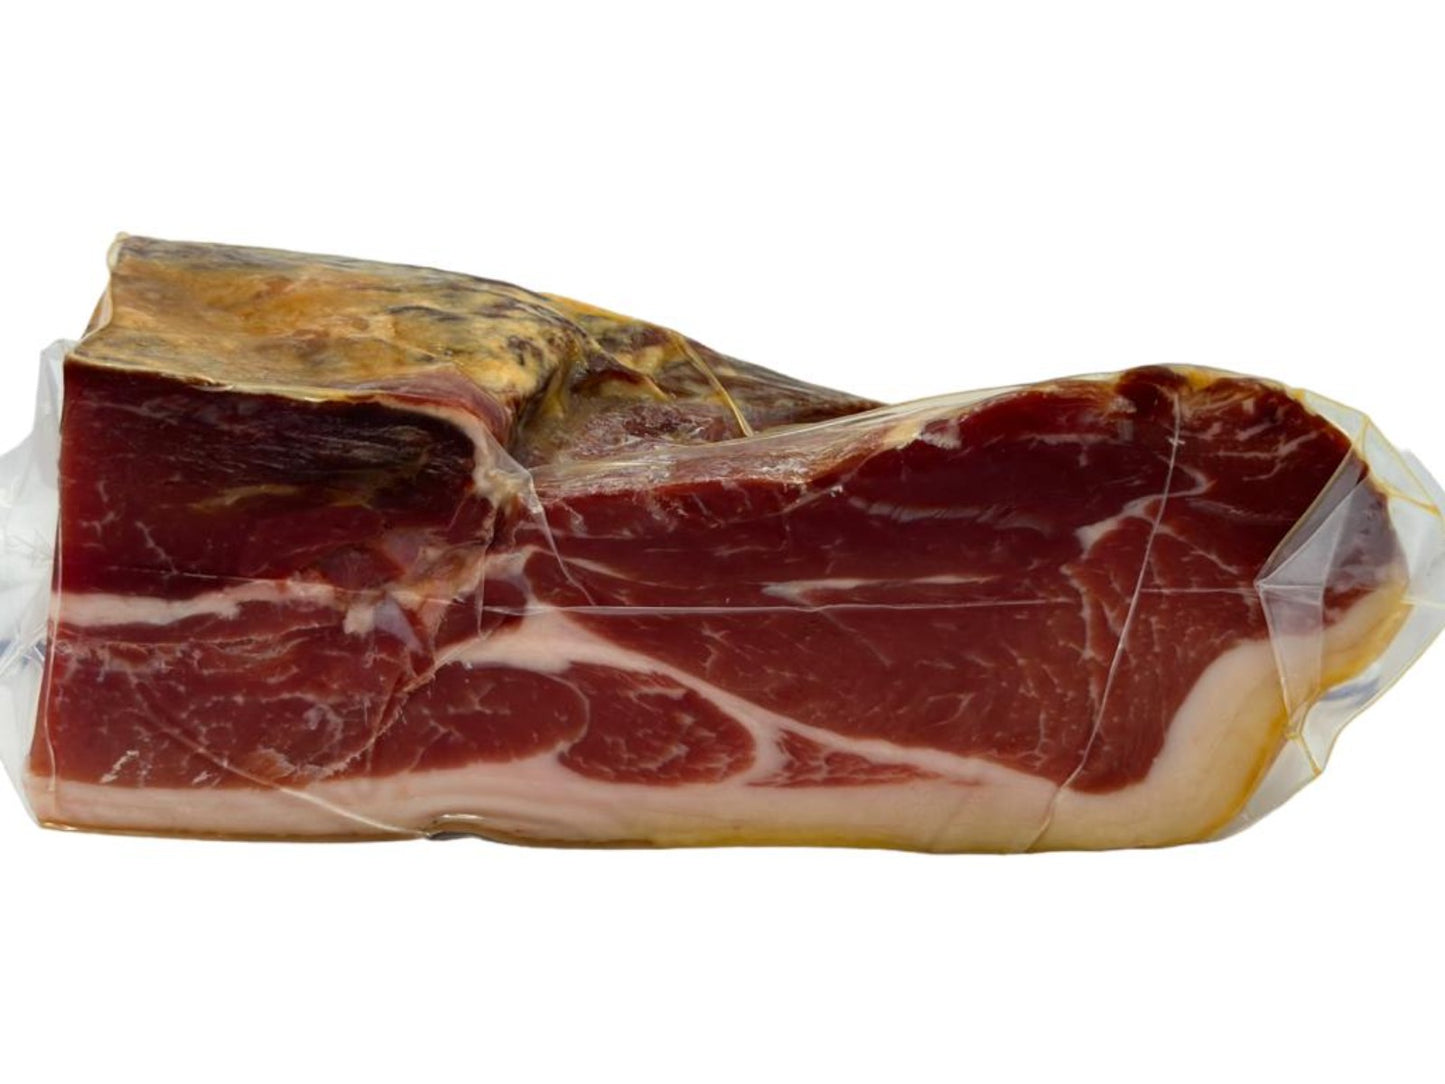 Espana y Hijos Jamon Serrano Quarter Leg Piece random weight approx. 2kg packet. Regular price $75.00 [You are guaranteed to receive at least 1.950kg of product, equivalent price of $38.46 per kg.]